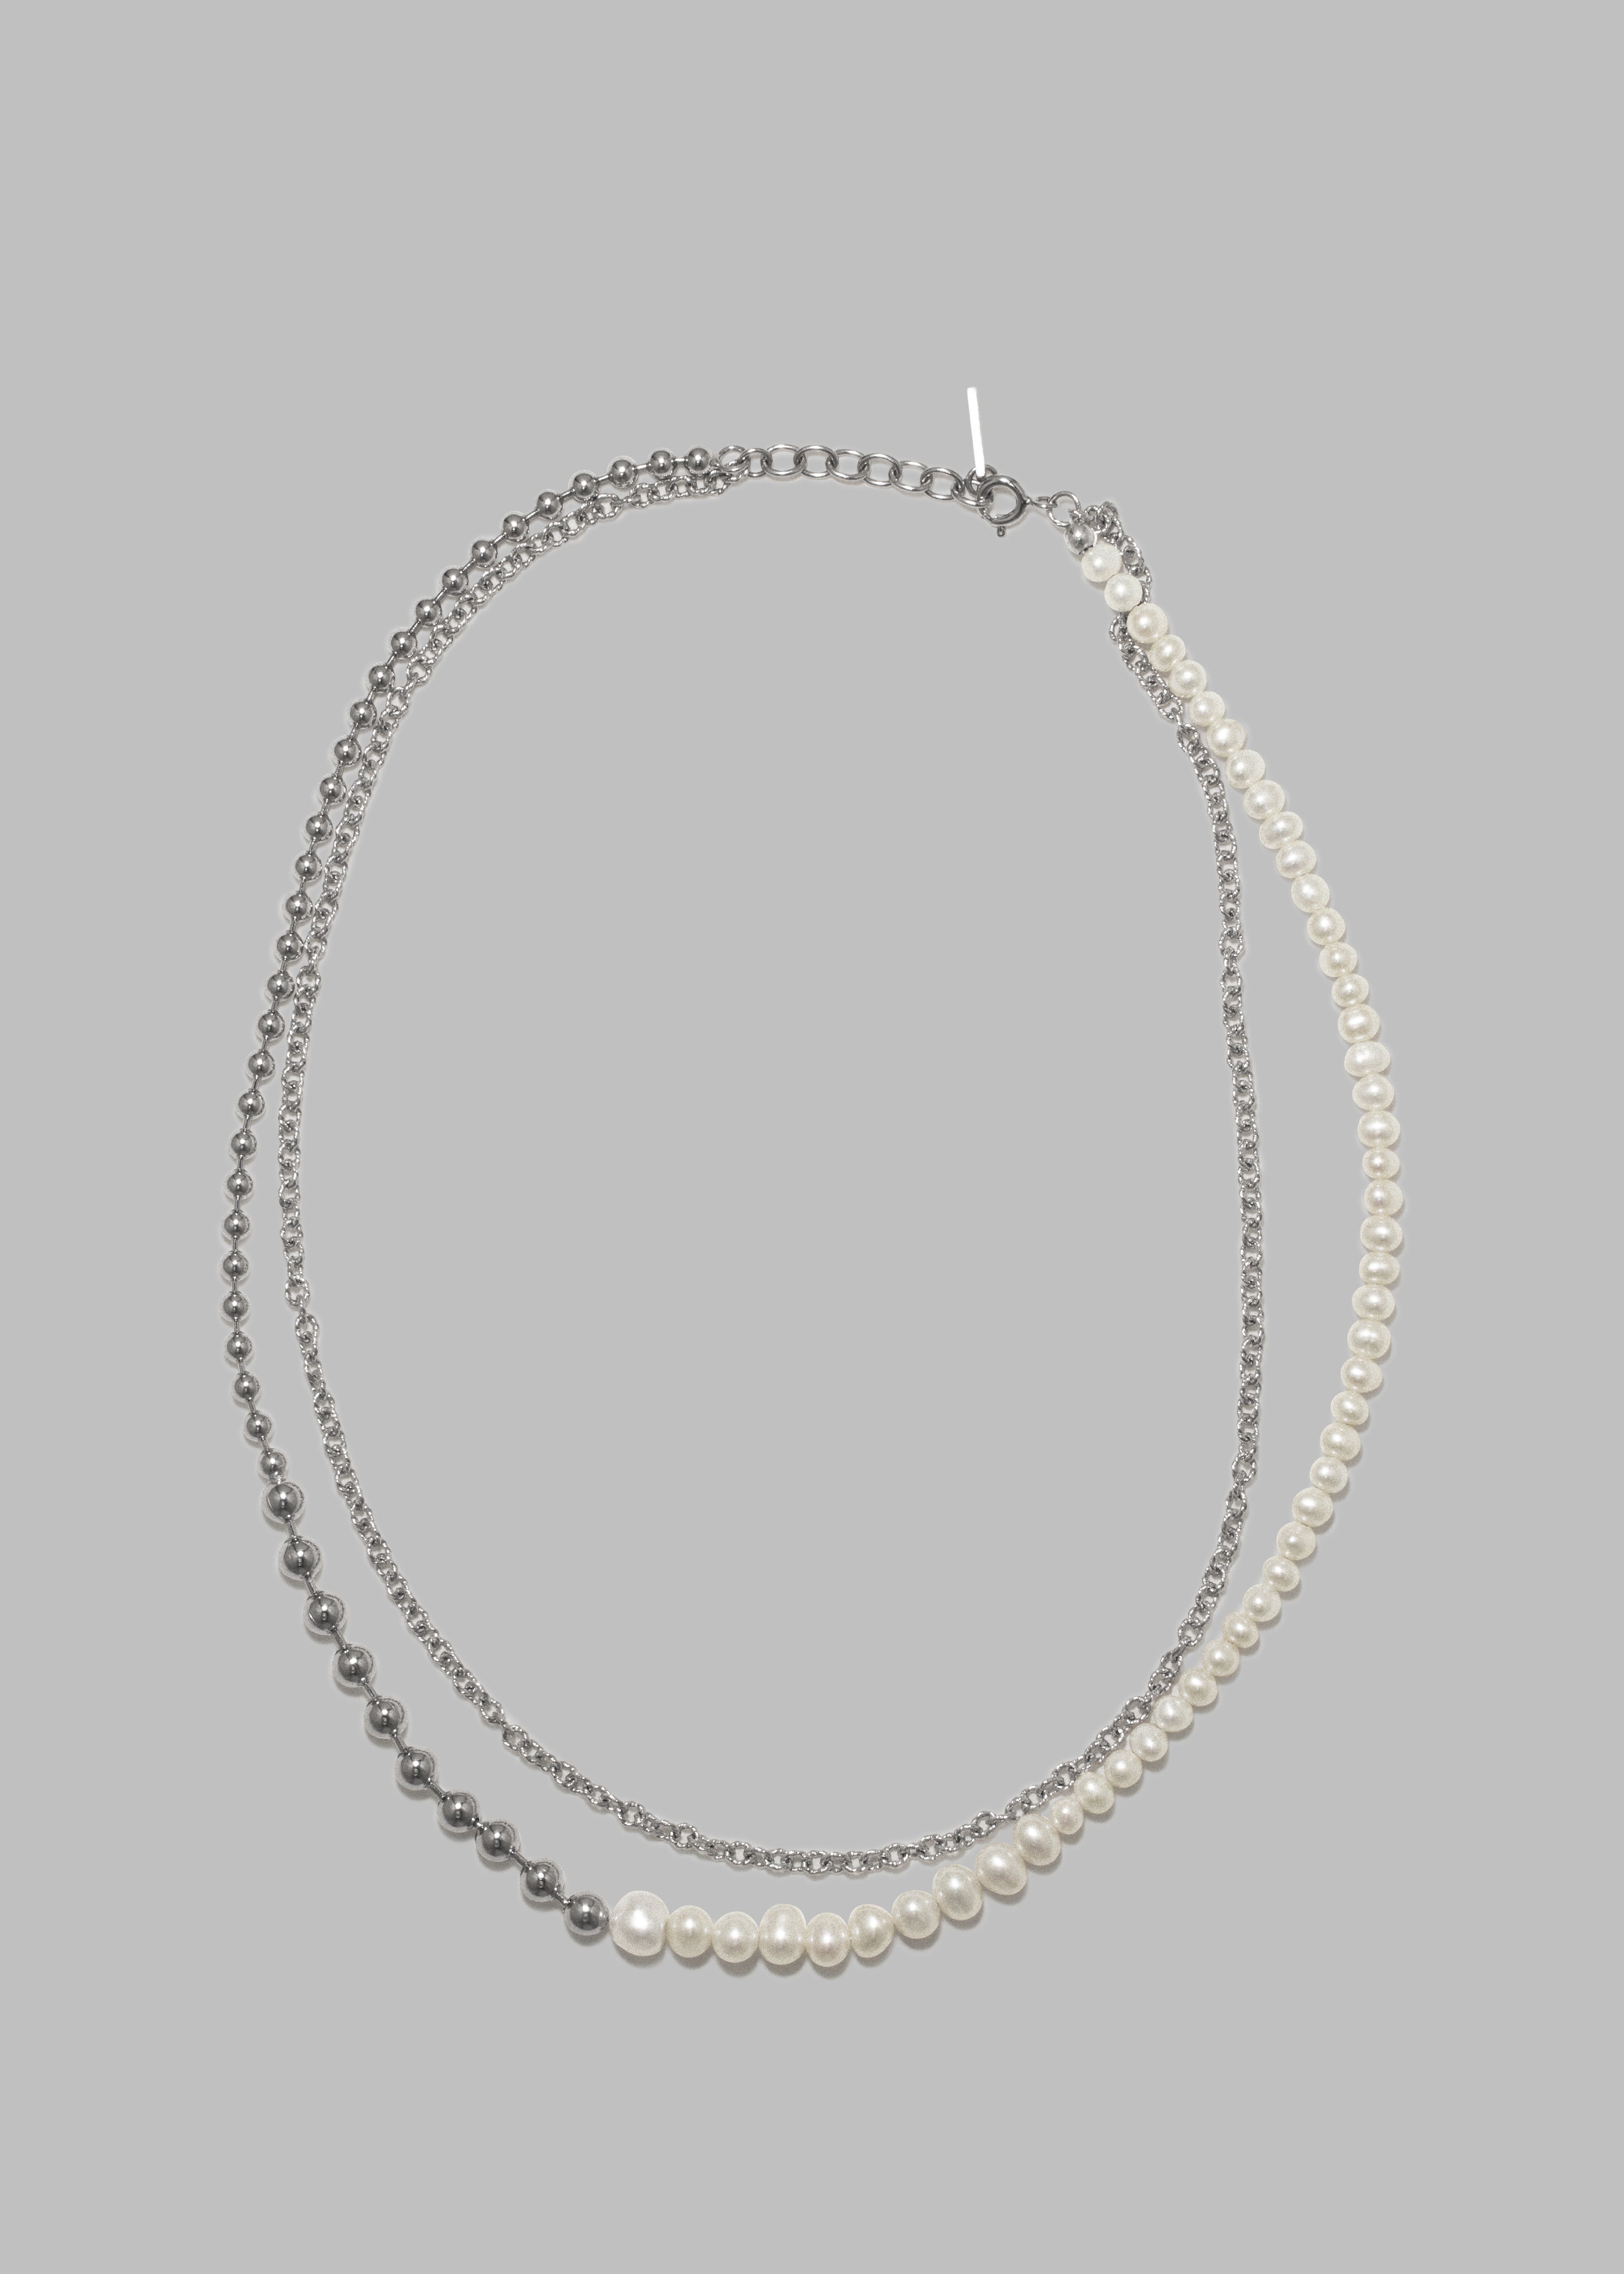 Completedworks Forgotten Seas Necklace - Pearl/Rhodium Plate - 2